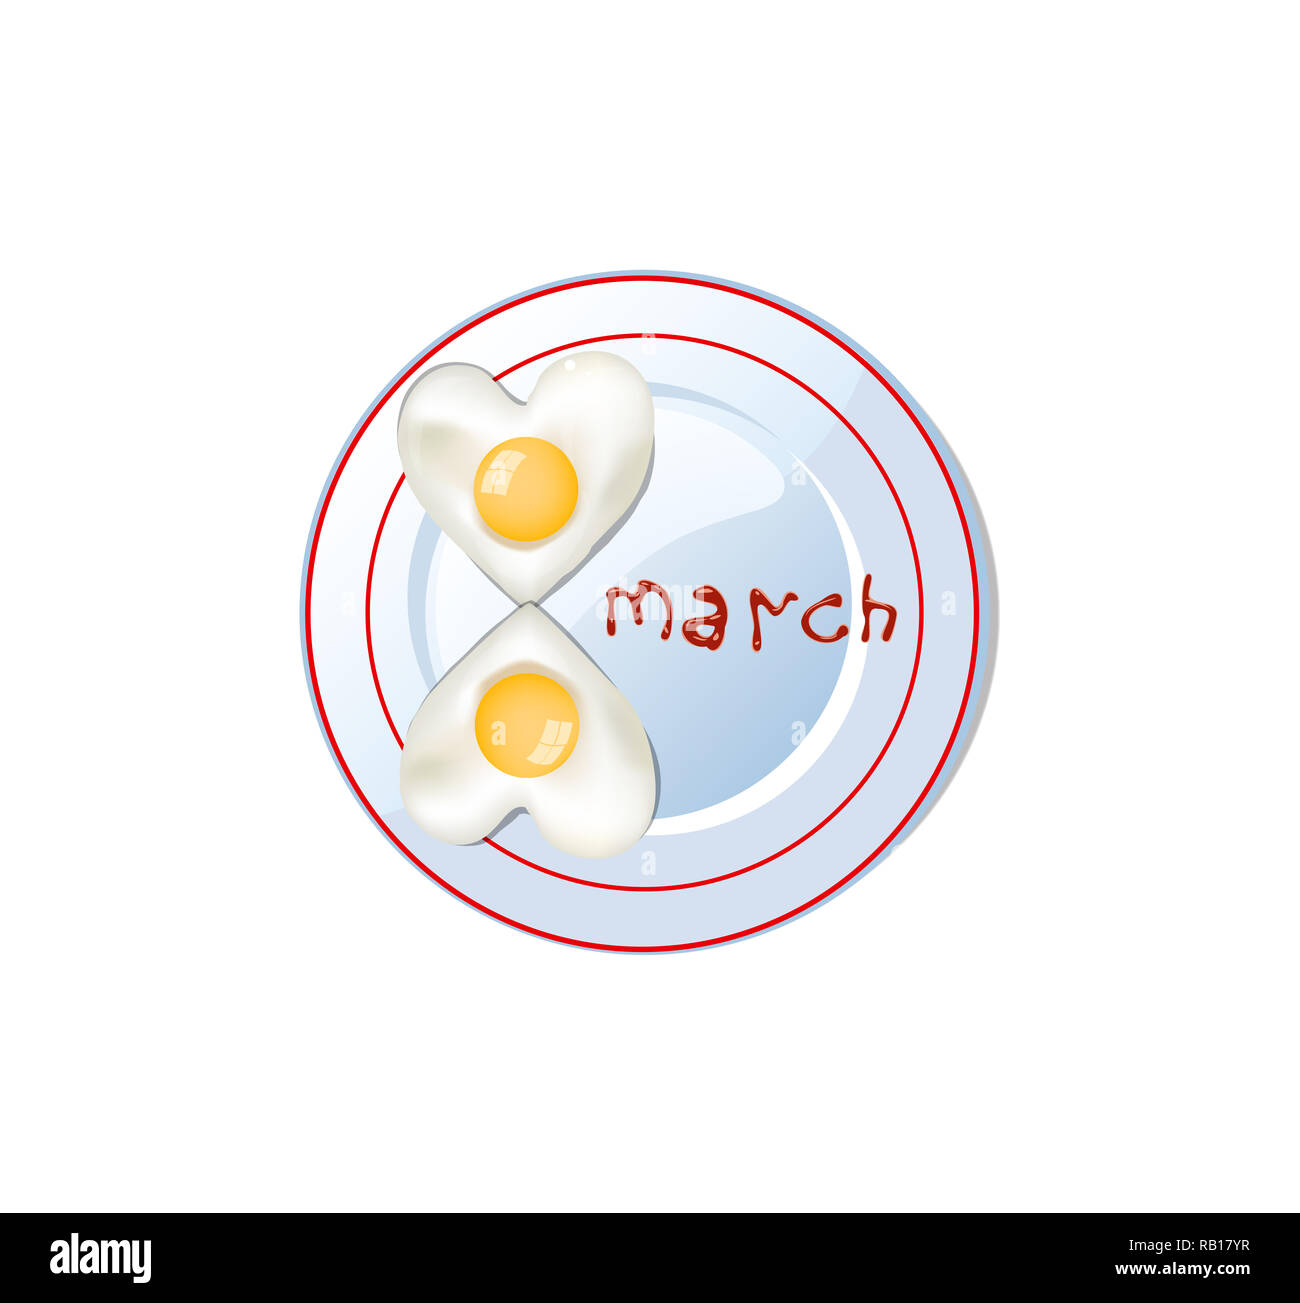 Happy women's day   illustration, clip art with number eight shaped heart omelette on plate with ketchup lettering isolated on white background. Festi Stock Photo